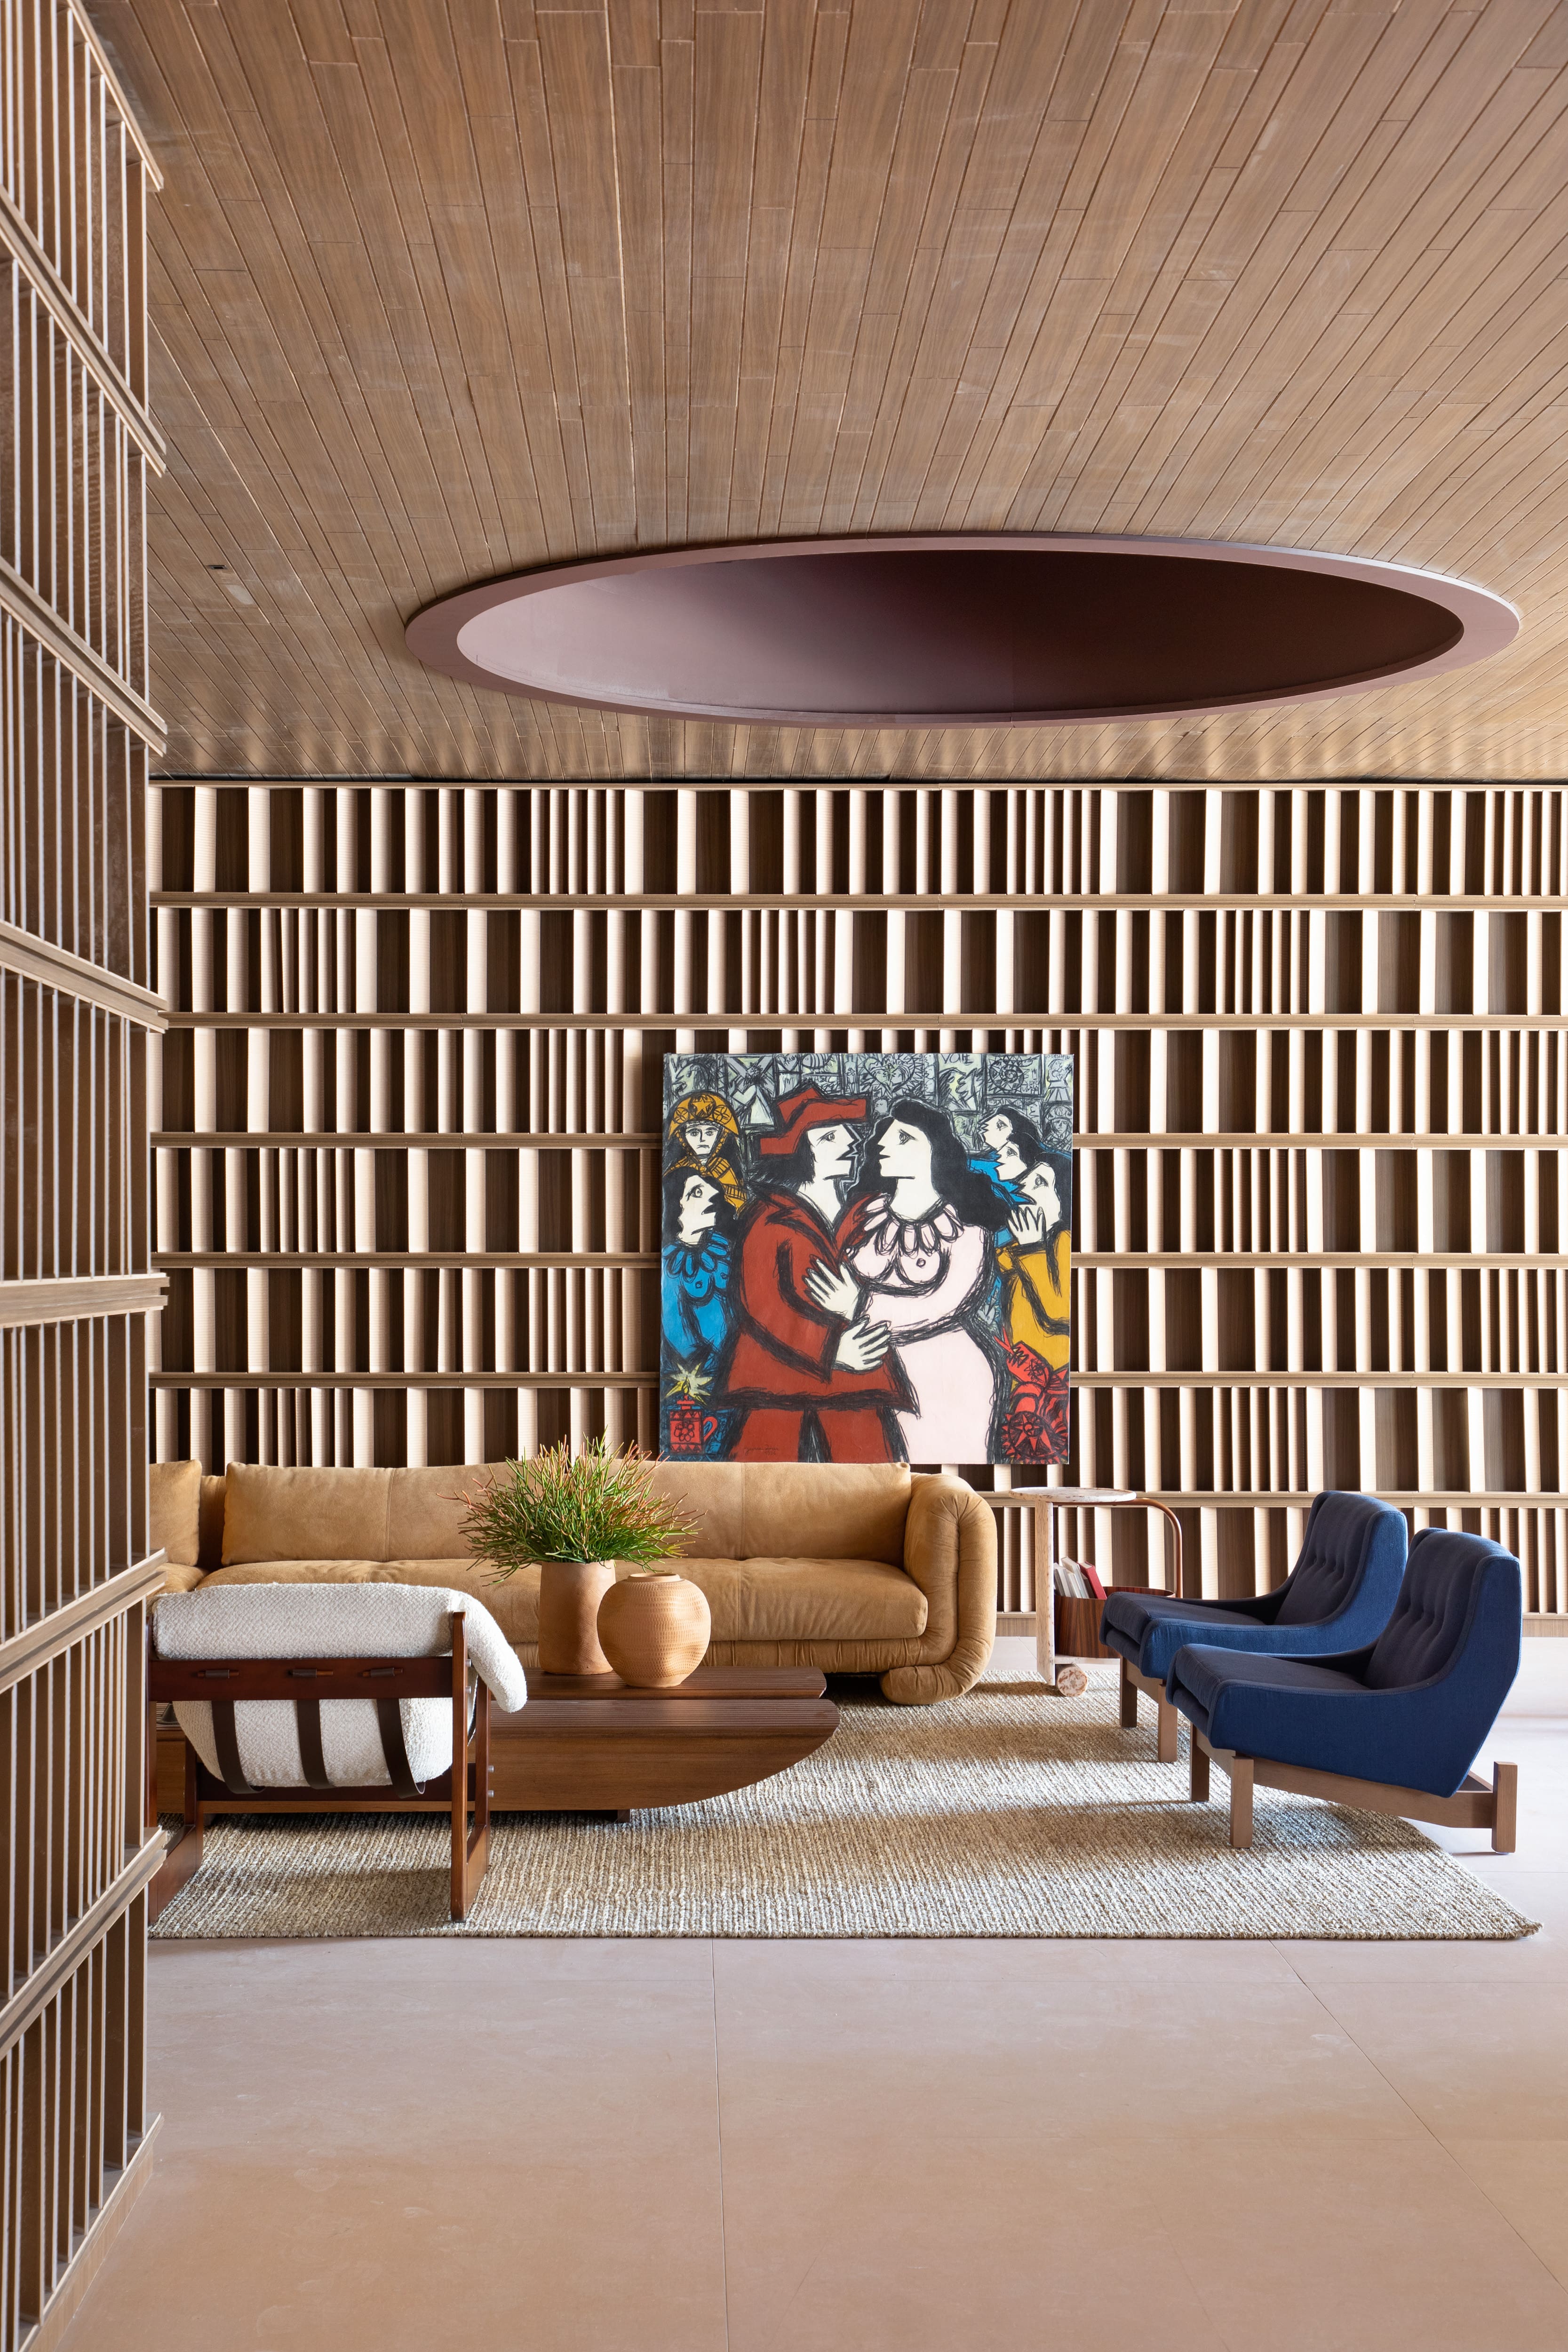 Nogueira Veneto pattern applied to the ceiling to align tradition with the contemporary